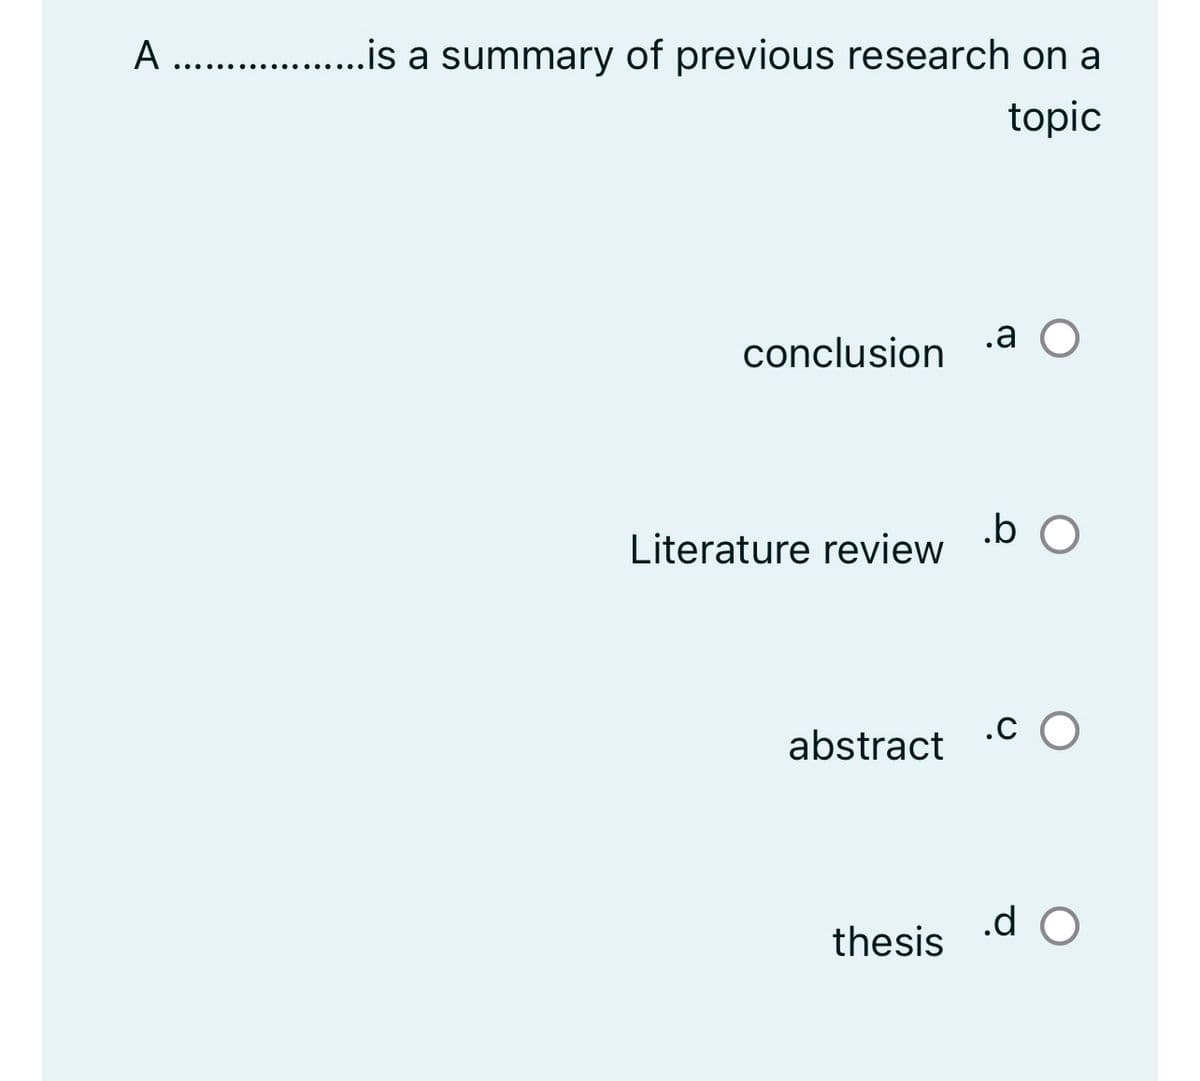 A ..................is a summary of previous research on a
topic
conclusion
Literature review
abstract
thesis
.a O
.b O
.CO
.d O